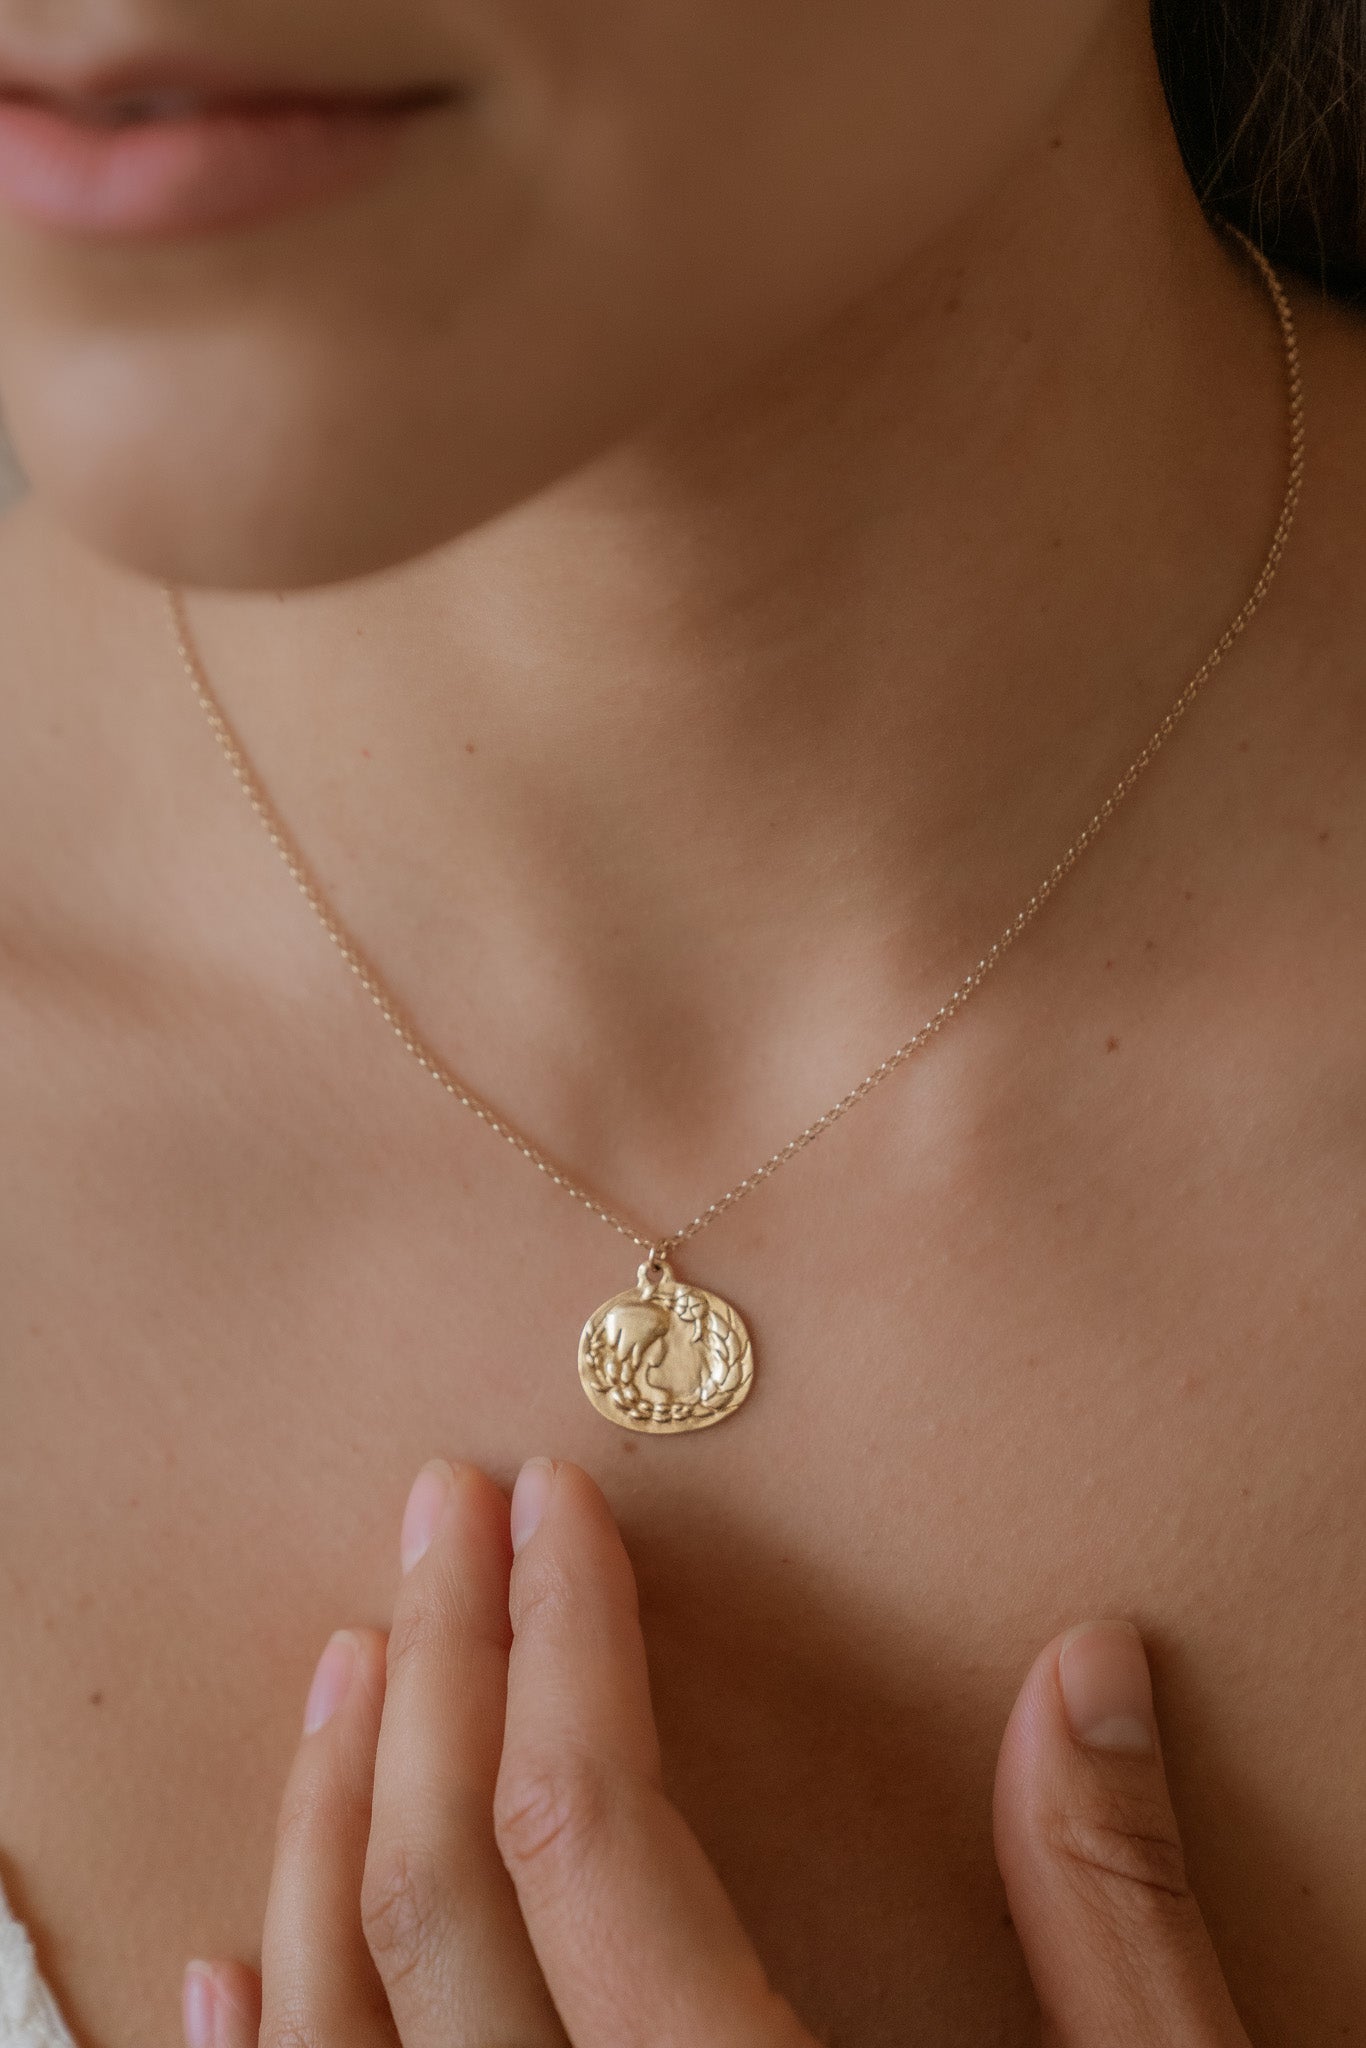 The sixth sign of the Zodiac, Earth sign Virgo is a tender humanitarian of strong character with an unparalleled eye for detail. A hand-carved goddess—surrounded by flowers and wearing a braid that turns into a sheaf— creates a necklace that captures the power of the celestial sky.